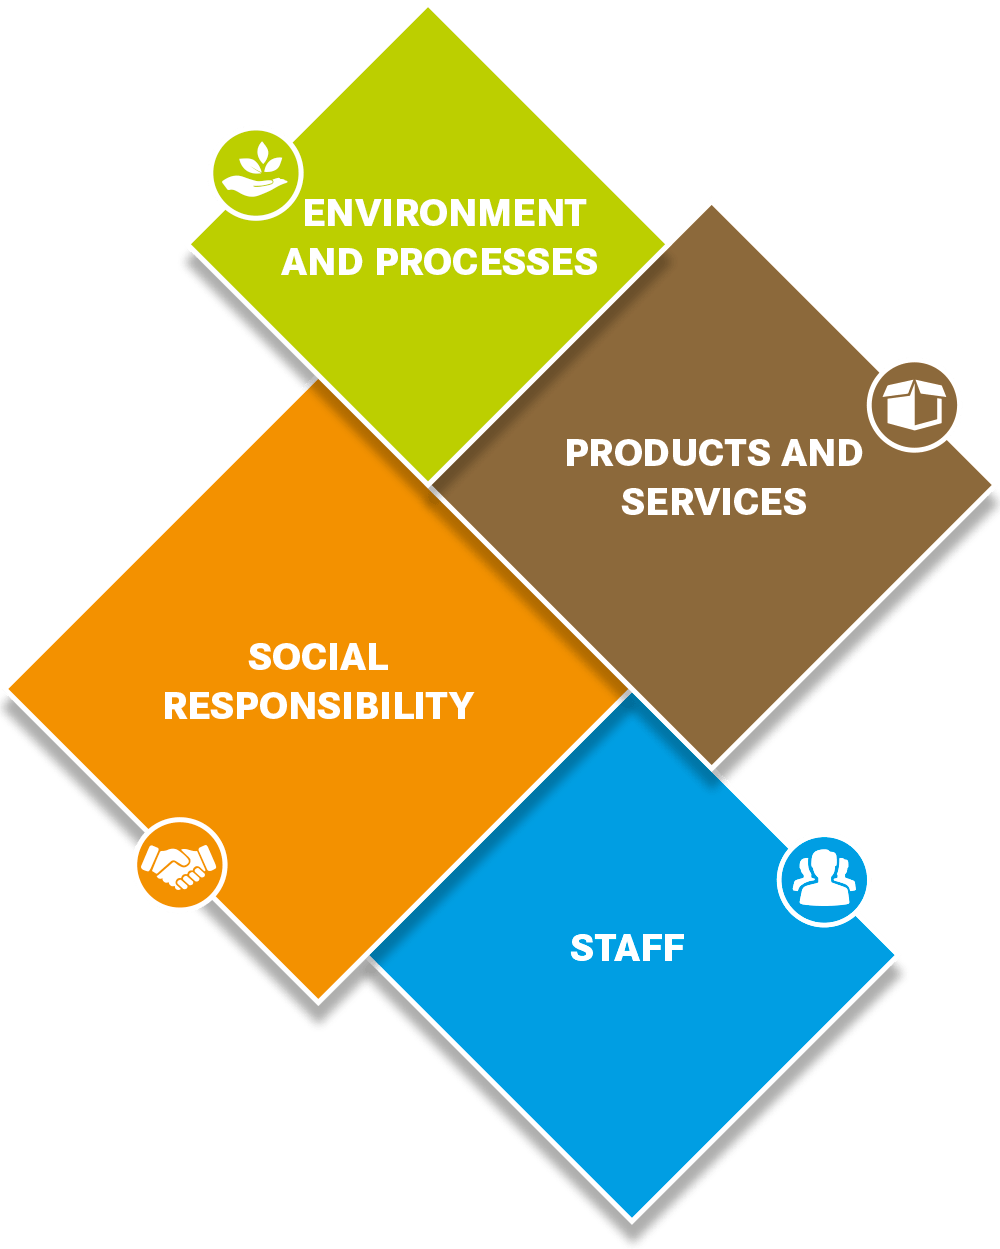 Our 4 pillars of sustainability